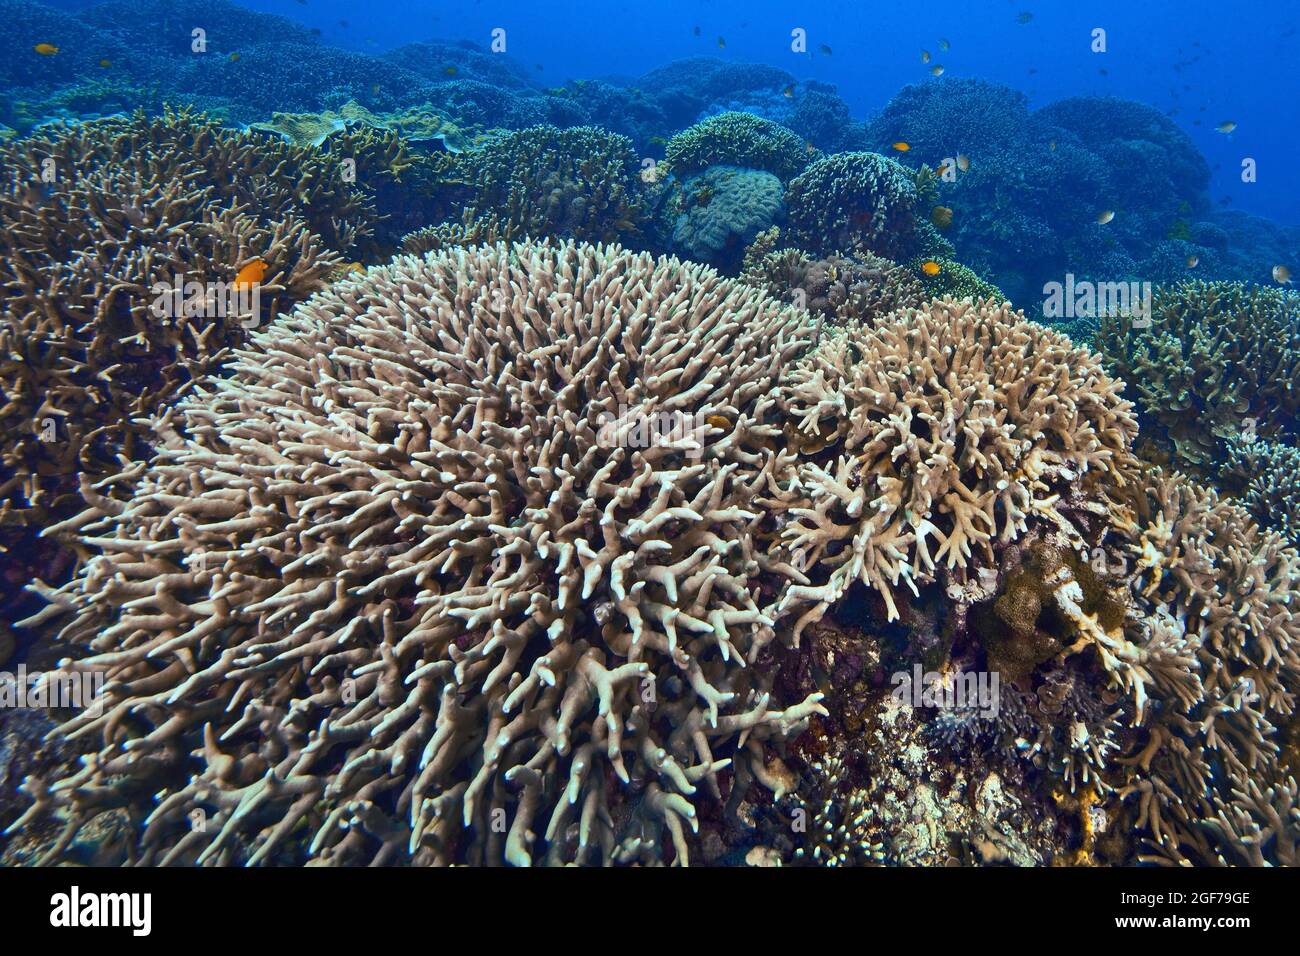 Large coral reef overgrown with small polyps (Acropora acuminata), Indo-Pacific, Pacific, Visayas, Philippines Stock Photo